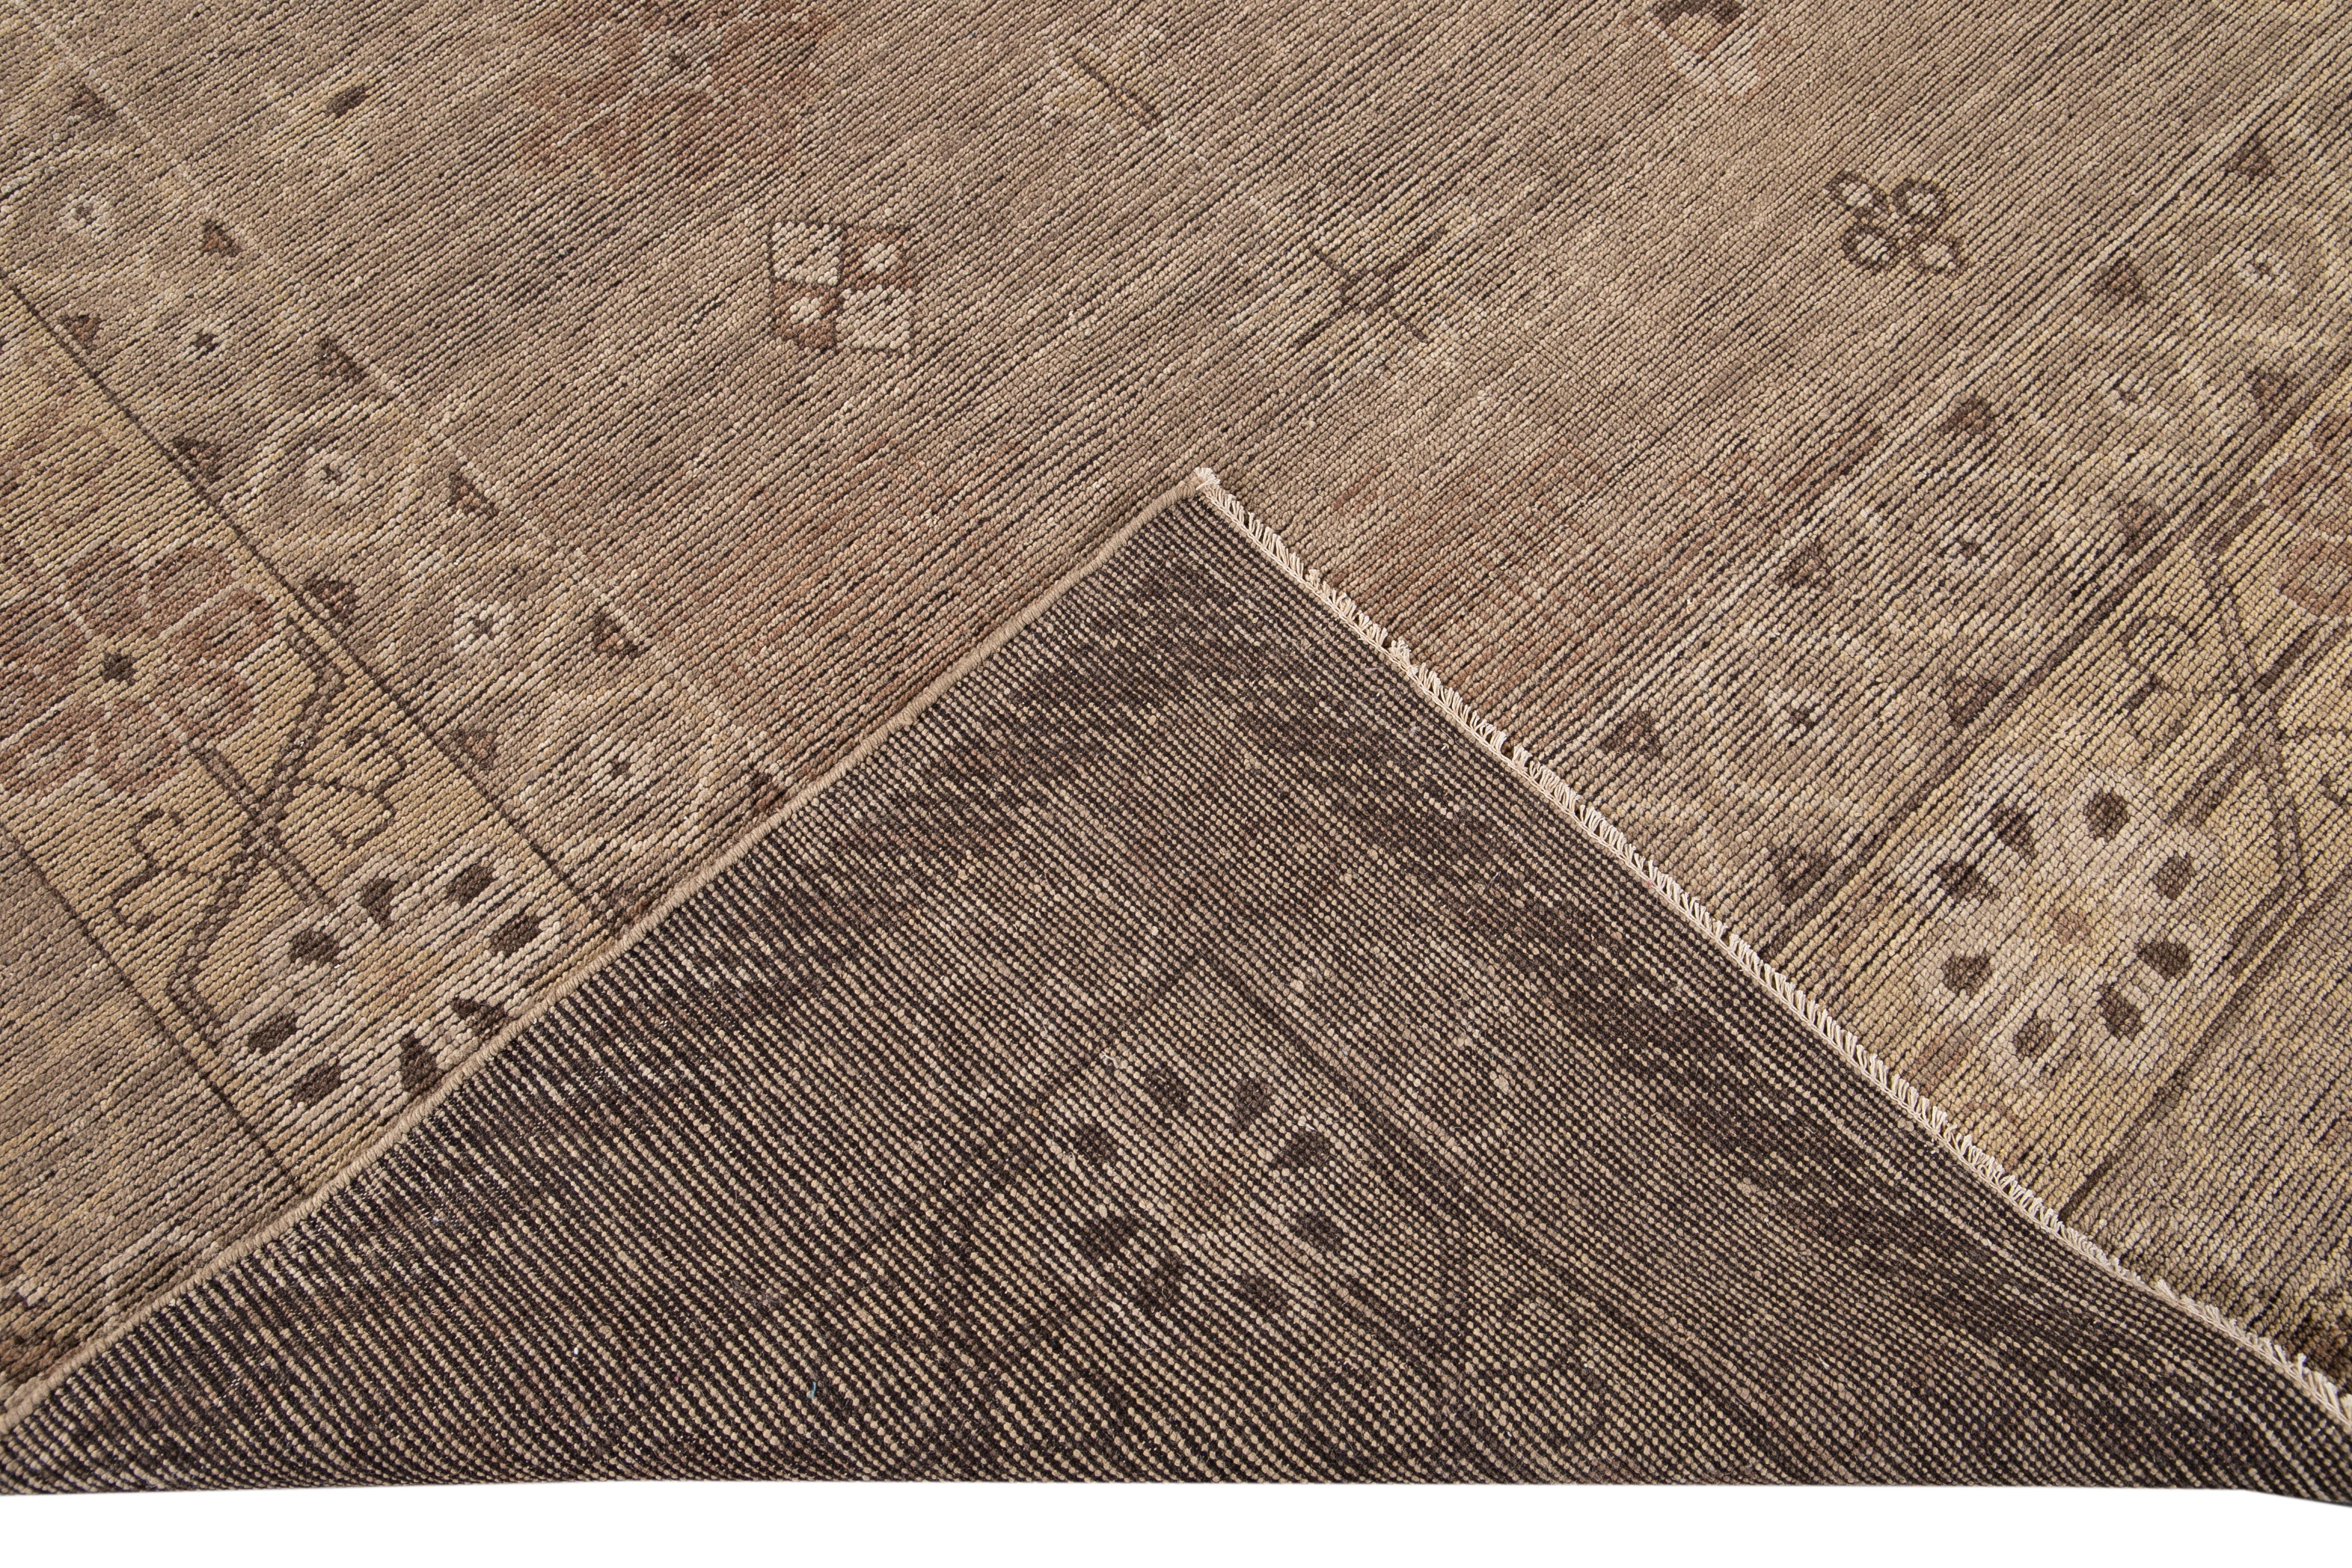 Beautiful modern oversize Khotan-style hand-knotted wool rug tan field. This Khotan-style rug has an accent of brown, beige, and Ivory in a gorgeous all-over geometric floral medallion design.

This rug measures: 11'10